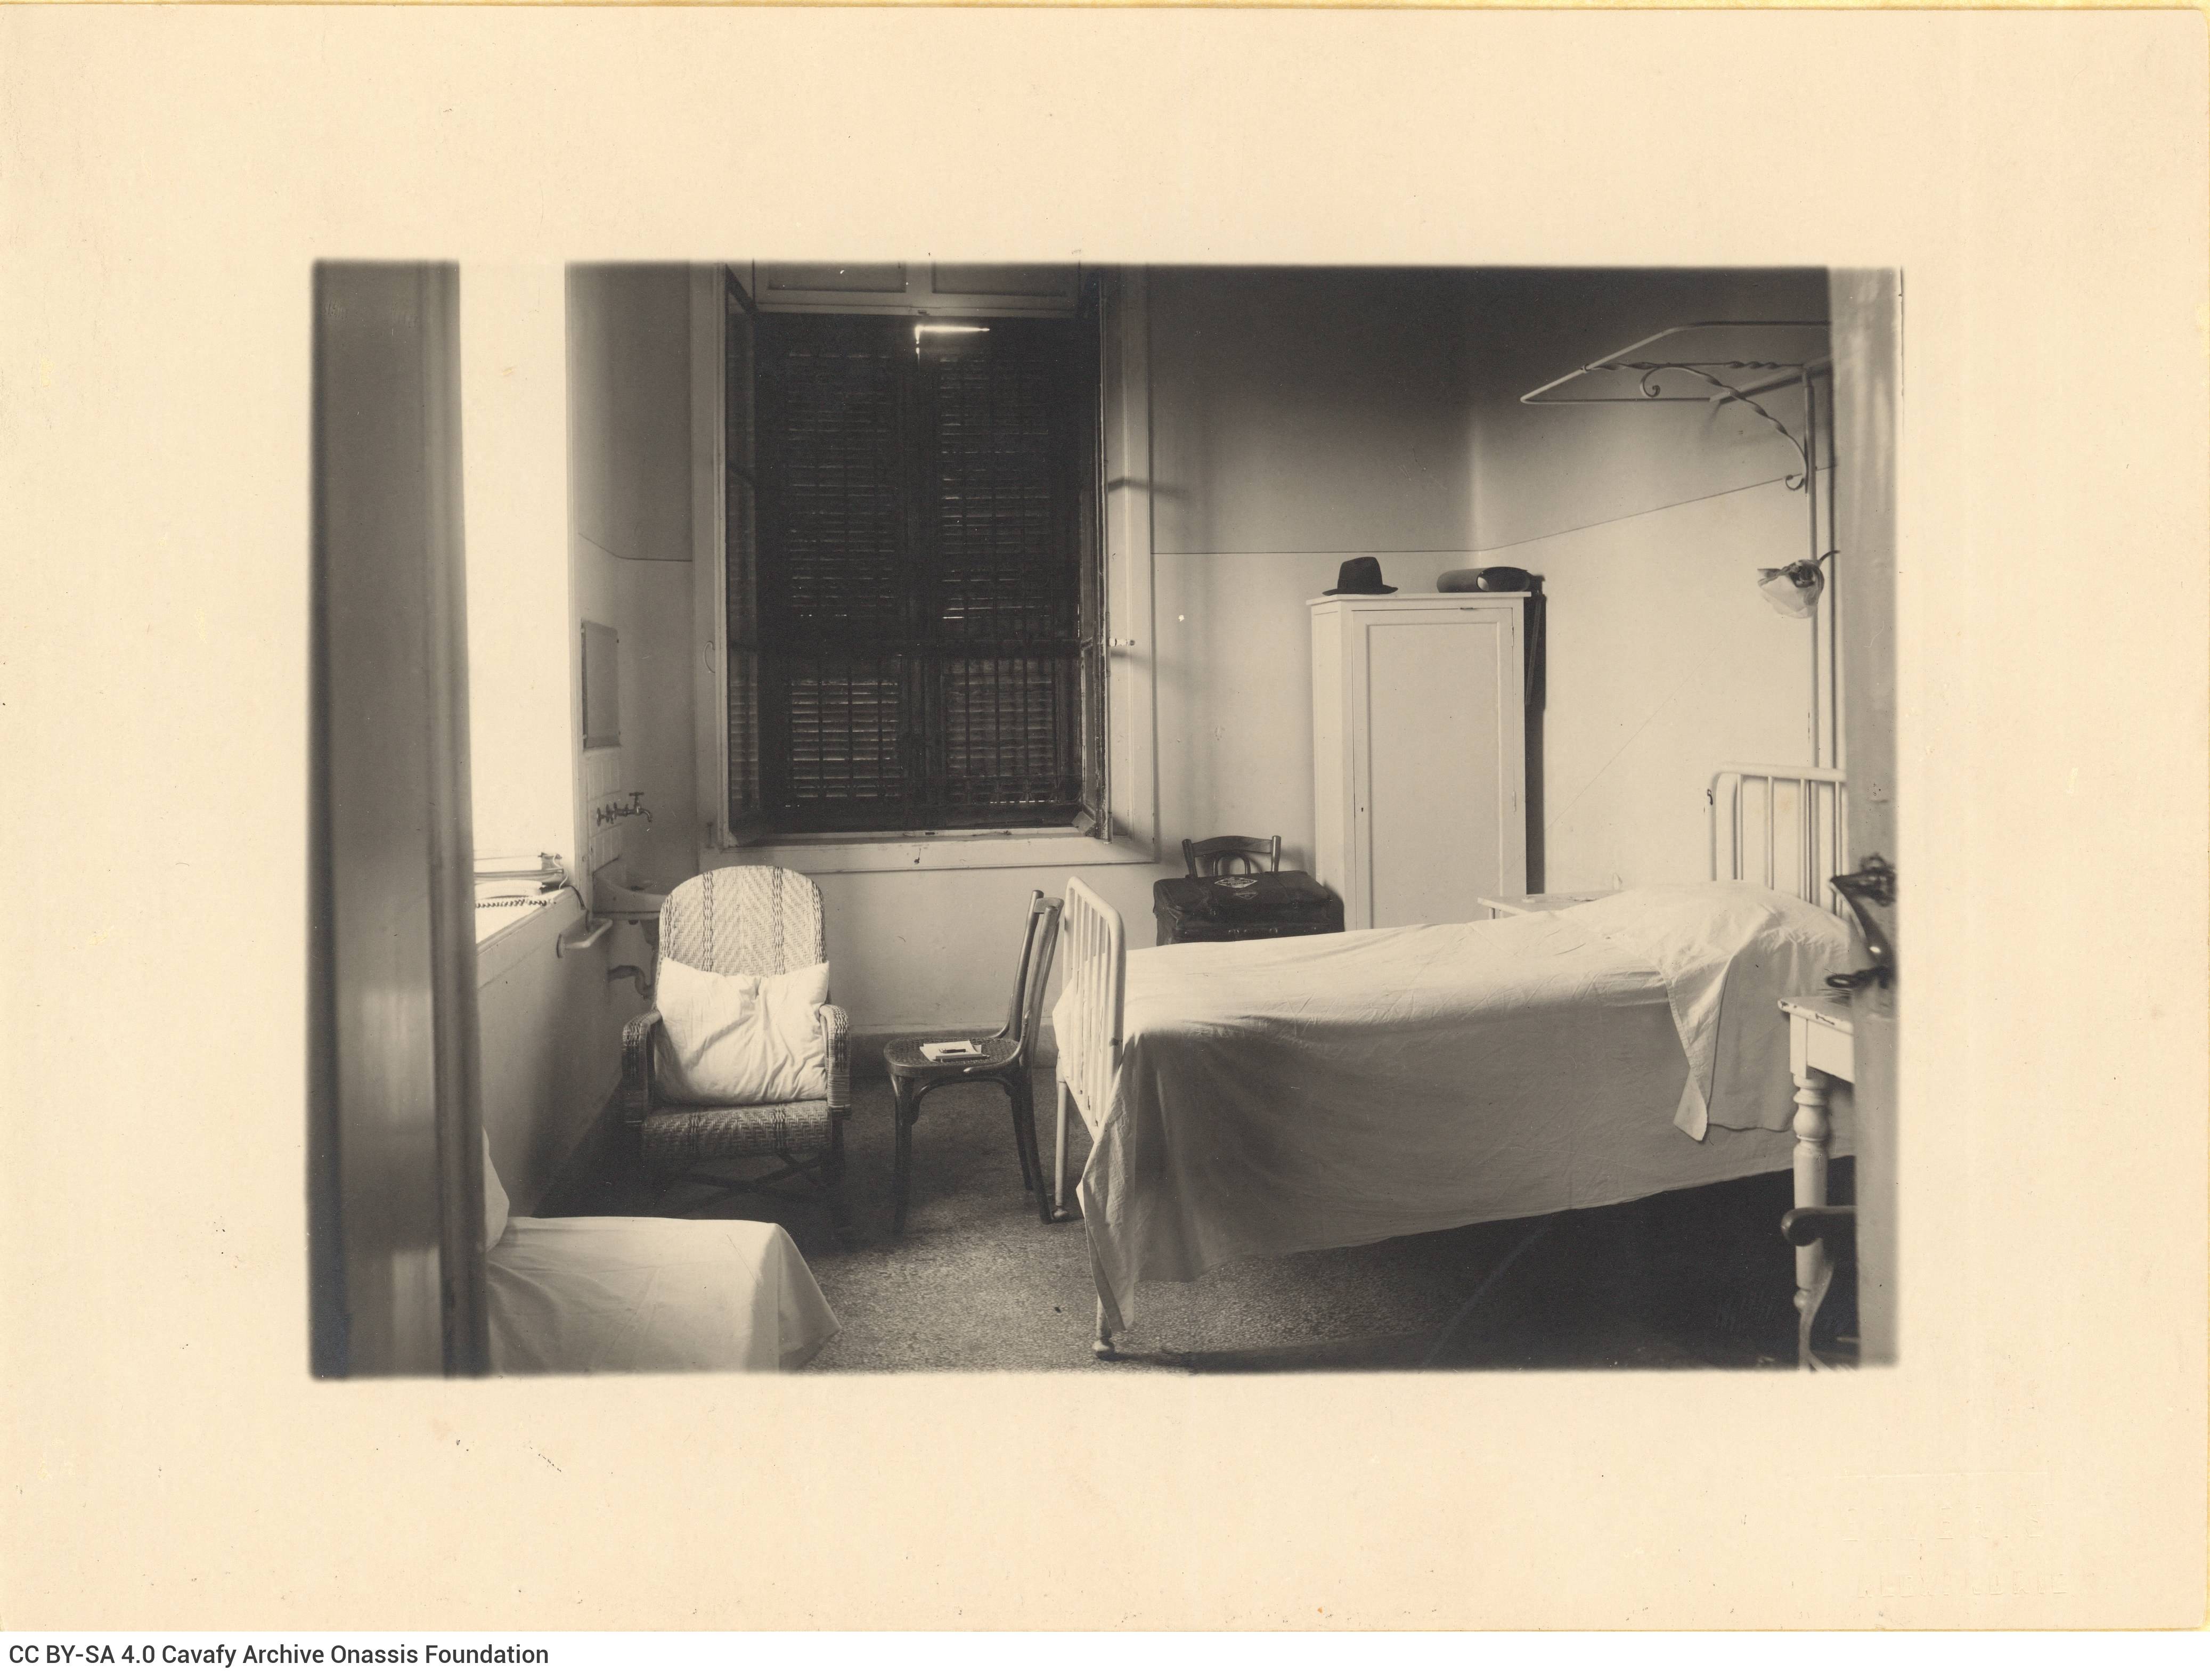 Photograph of the room in the Greek Hospital of Alexandria where Cavafy died. Some of his personal items can be seen, such as